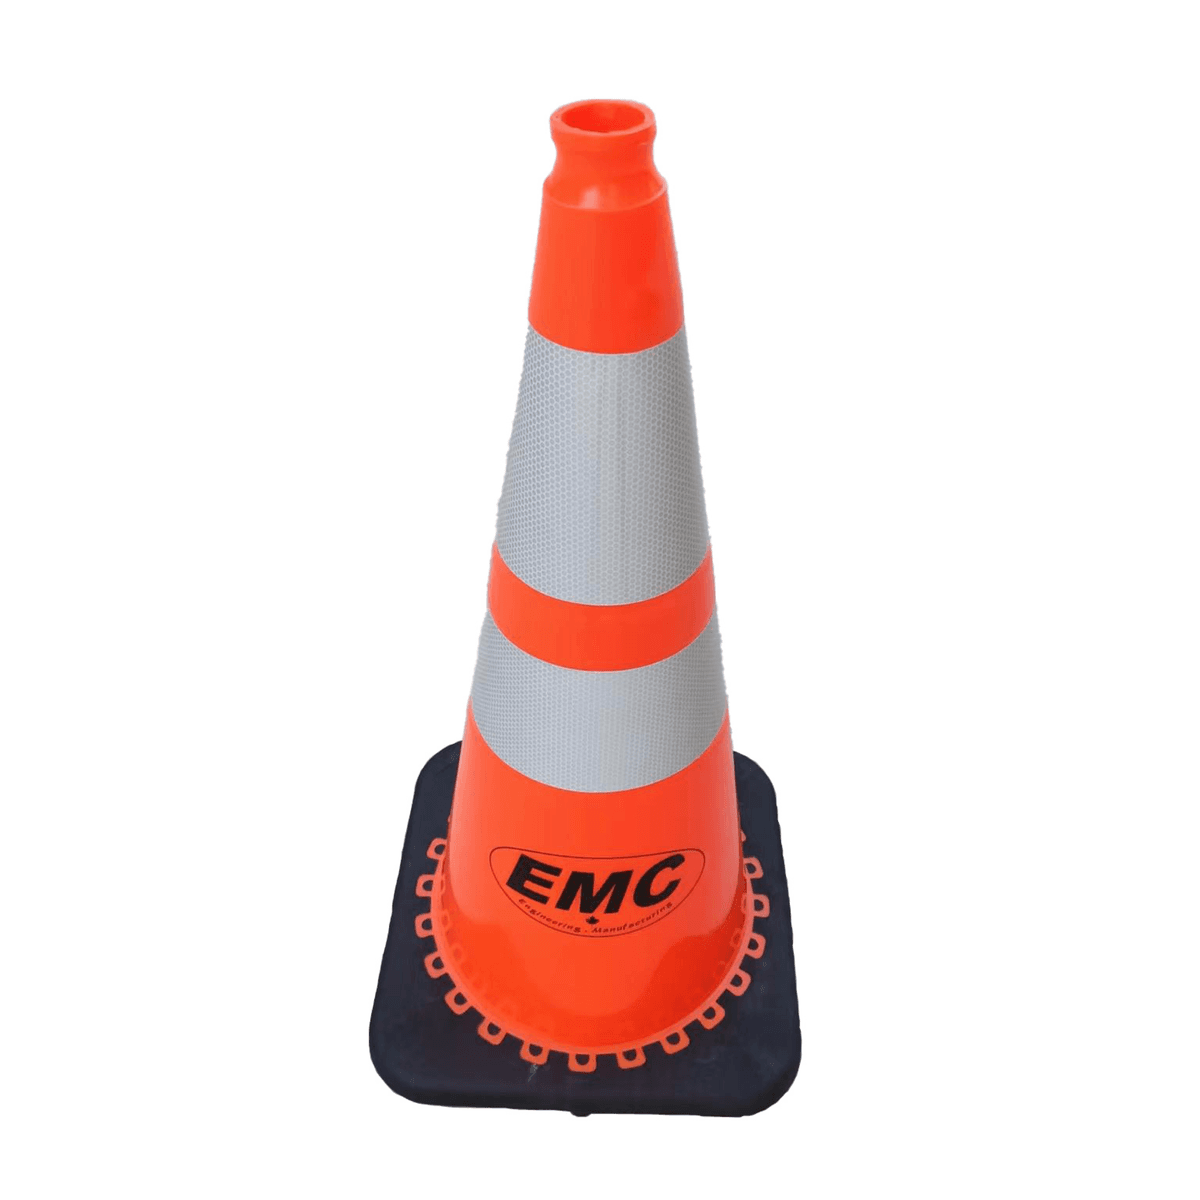 Value Industrial pack of 250 Traffic Safety Pylon - reflective top - durable pigment paint coat